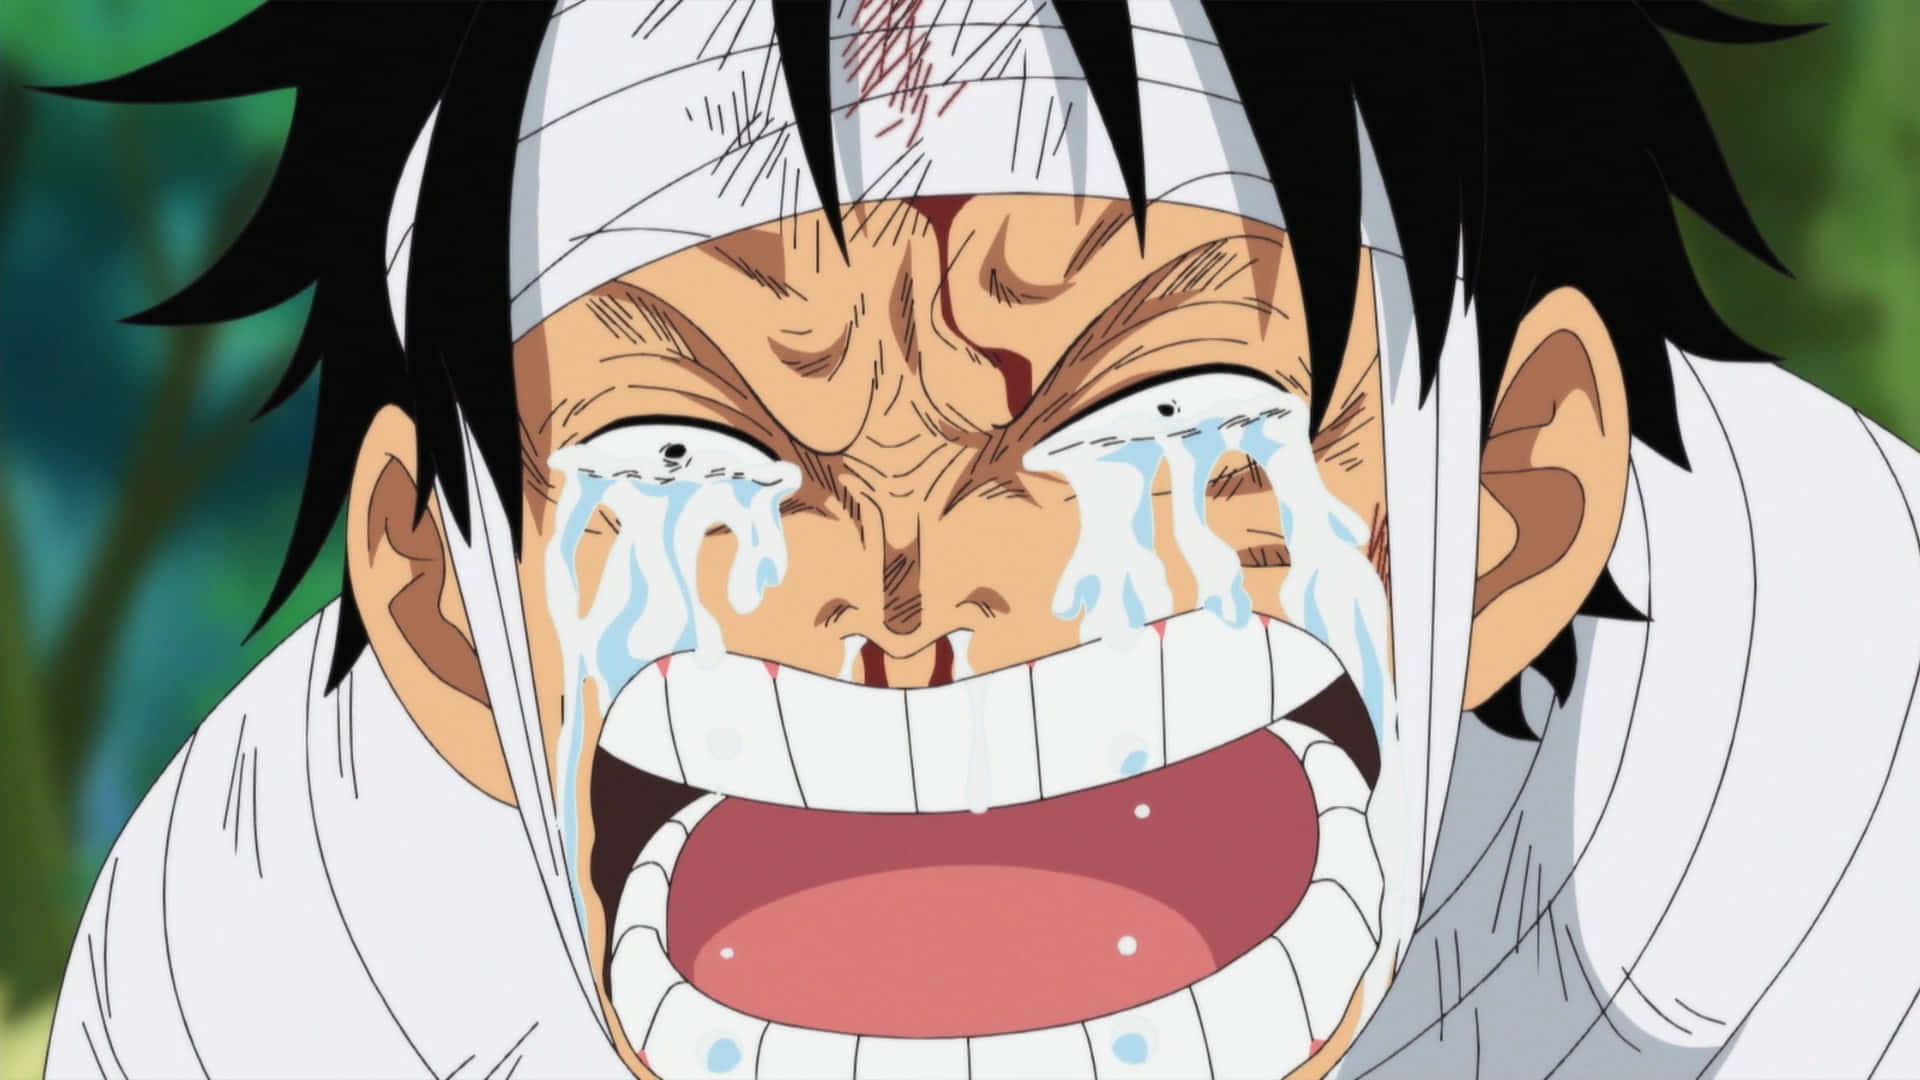 Animated Character Crying Excessively.jpg Wallpaper